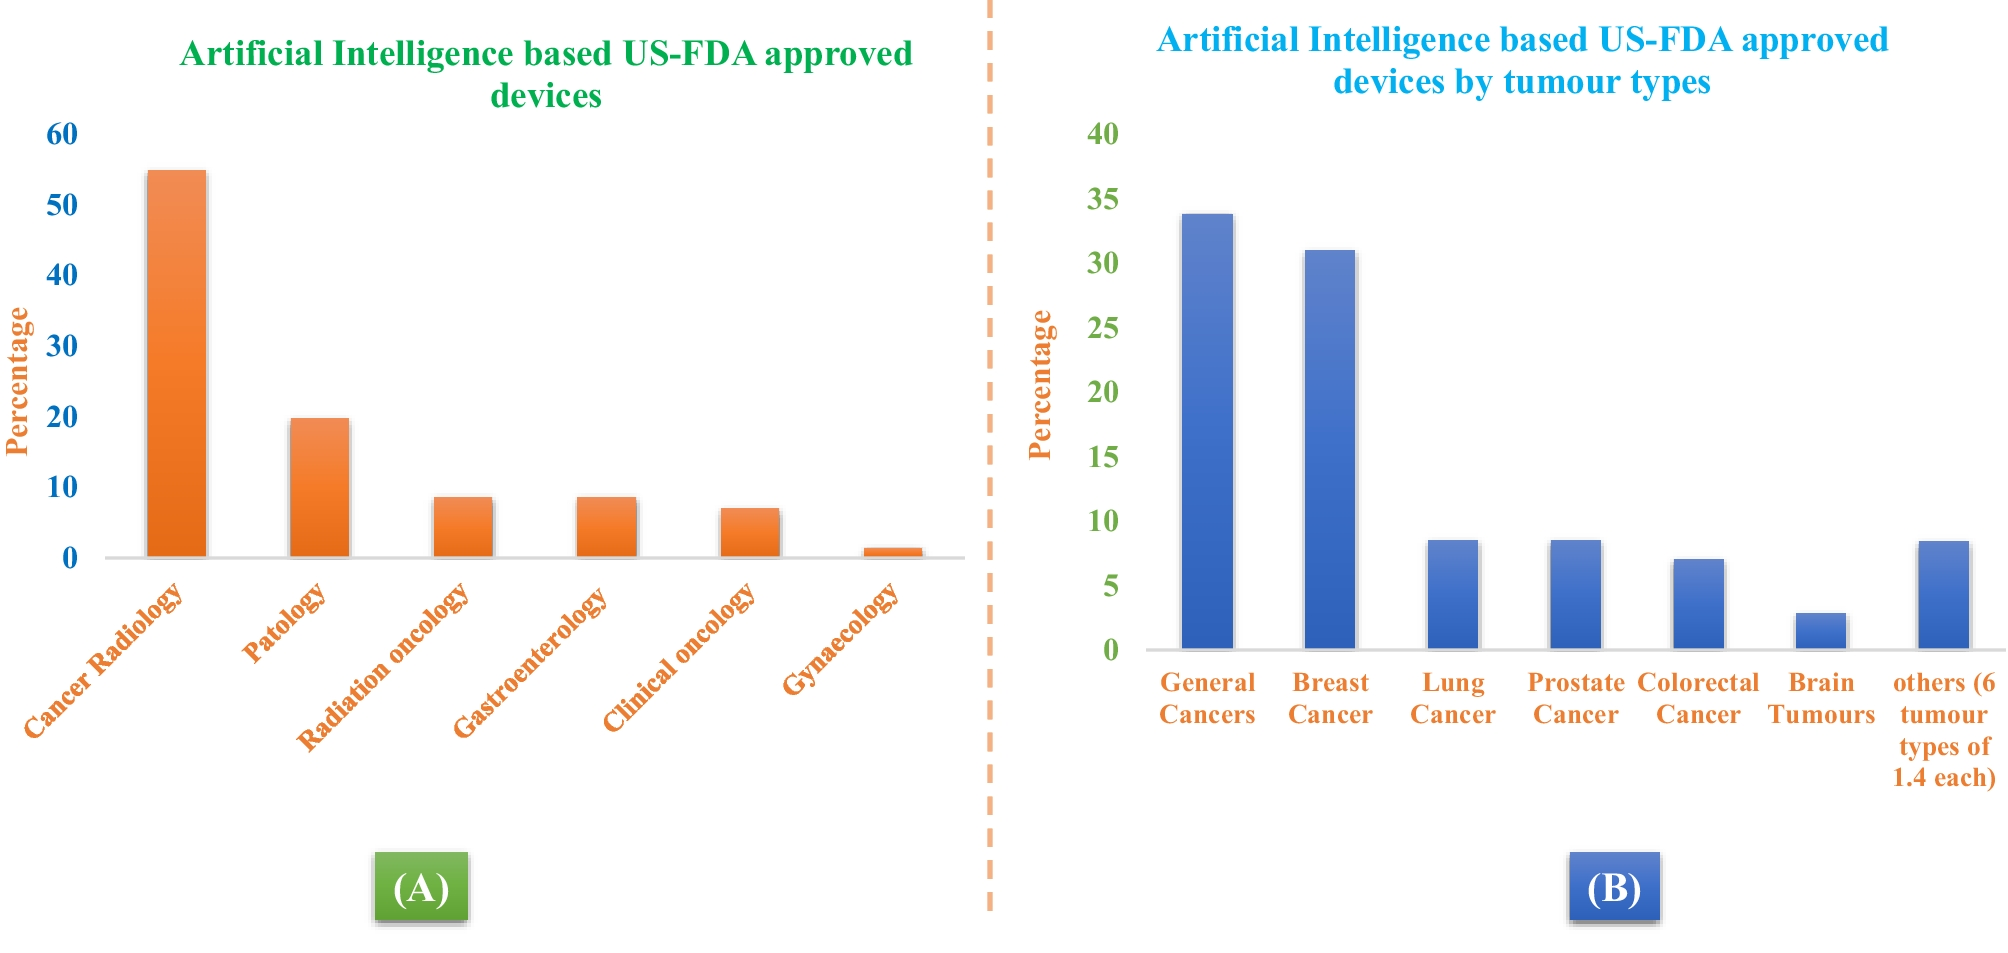 Artificial intelligence in the treatment of cancer: Changing patterns, constraints, and prospects